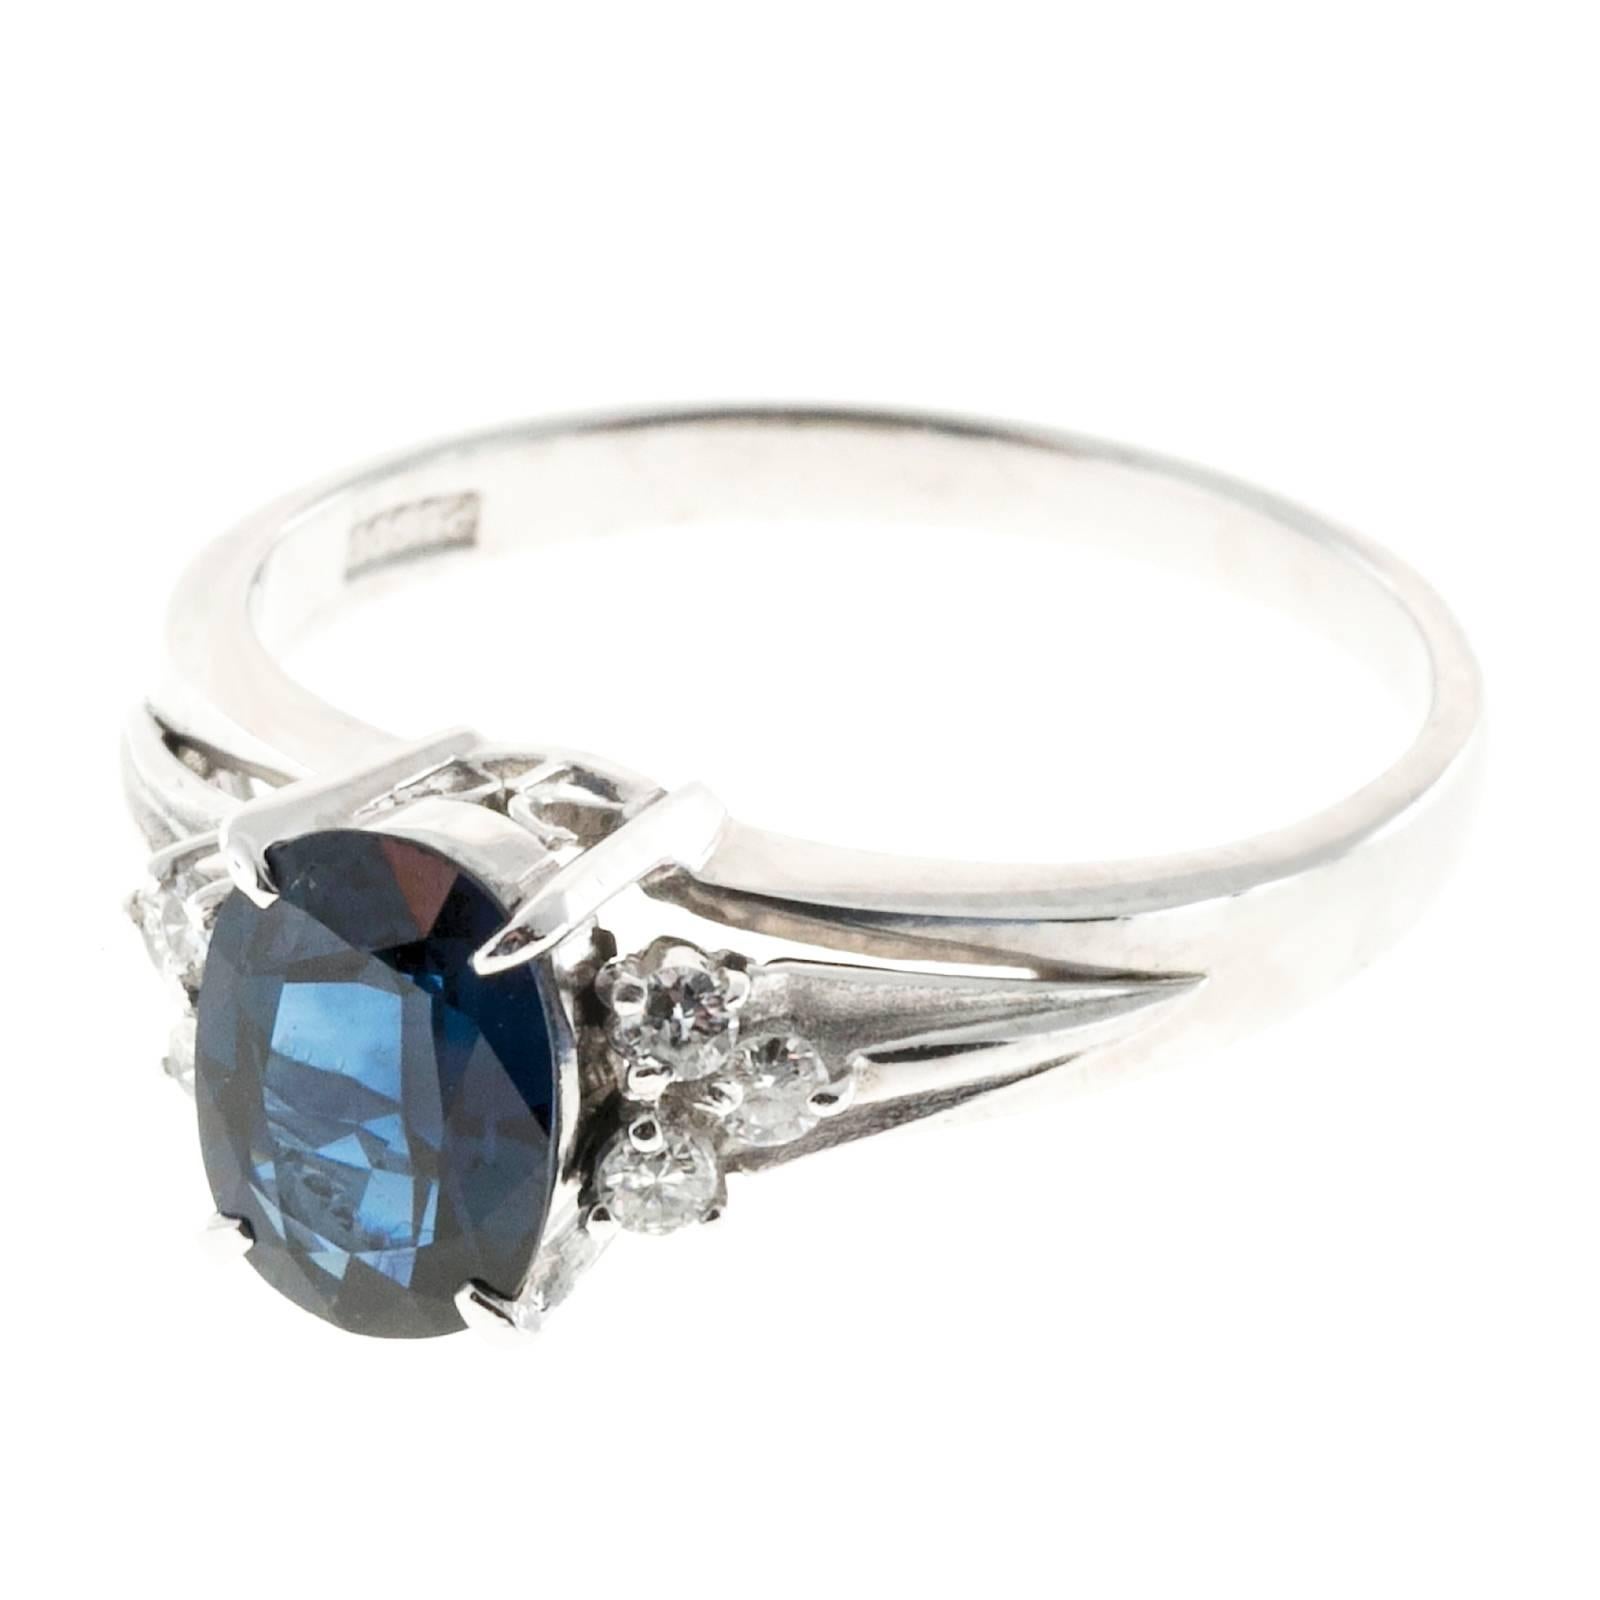 Oval sapphire Platinum engagement ring with white side diamonds.

1, 7.9 x 5.7mm oval Sapphire, approx. total weight 1.45cts, natural color and simple heat only
6 full cut diamonds, approx. total weight .12cts, H, VS
Platinum
Stamped: Pt 900 .12
4.3